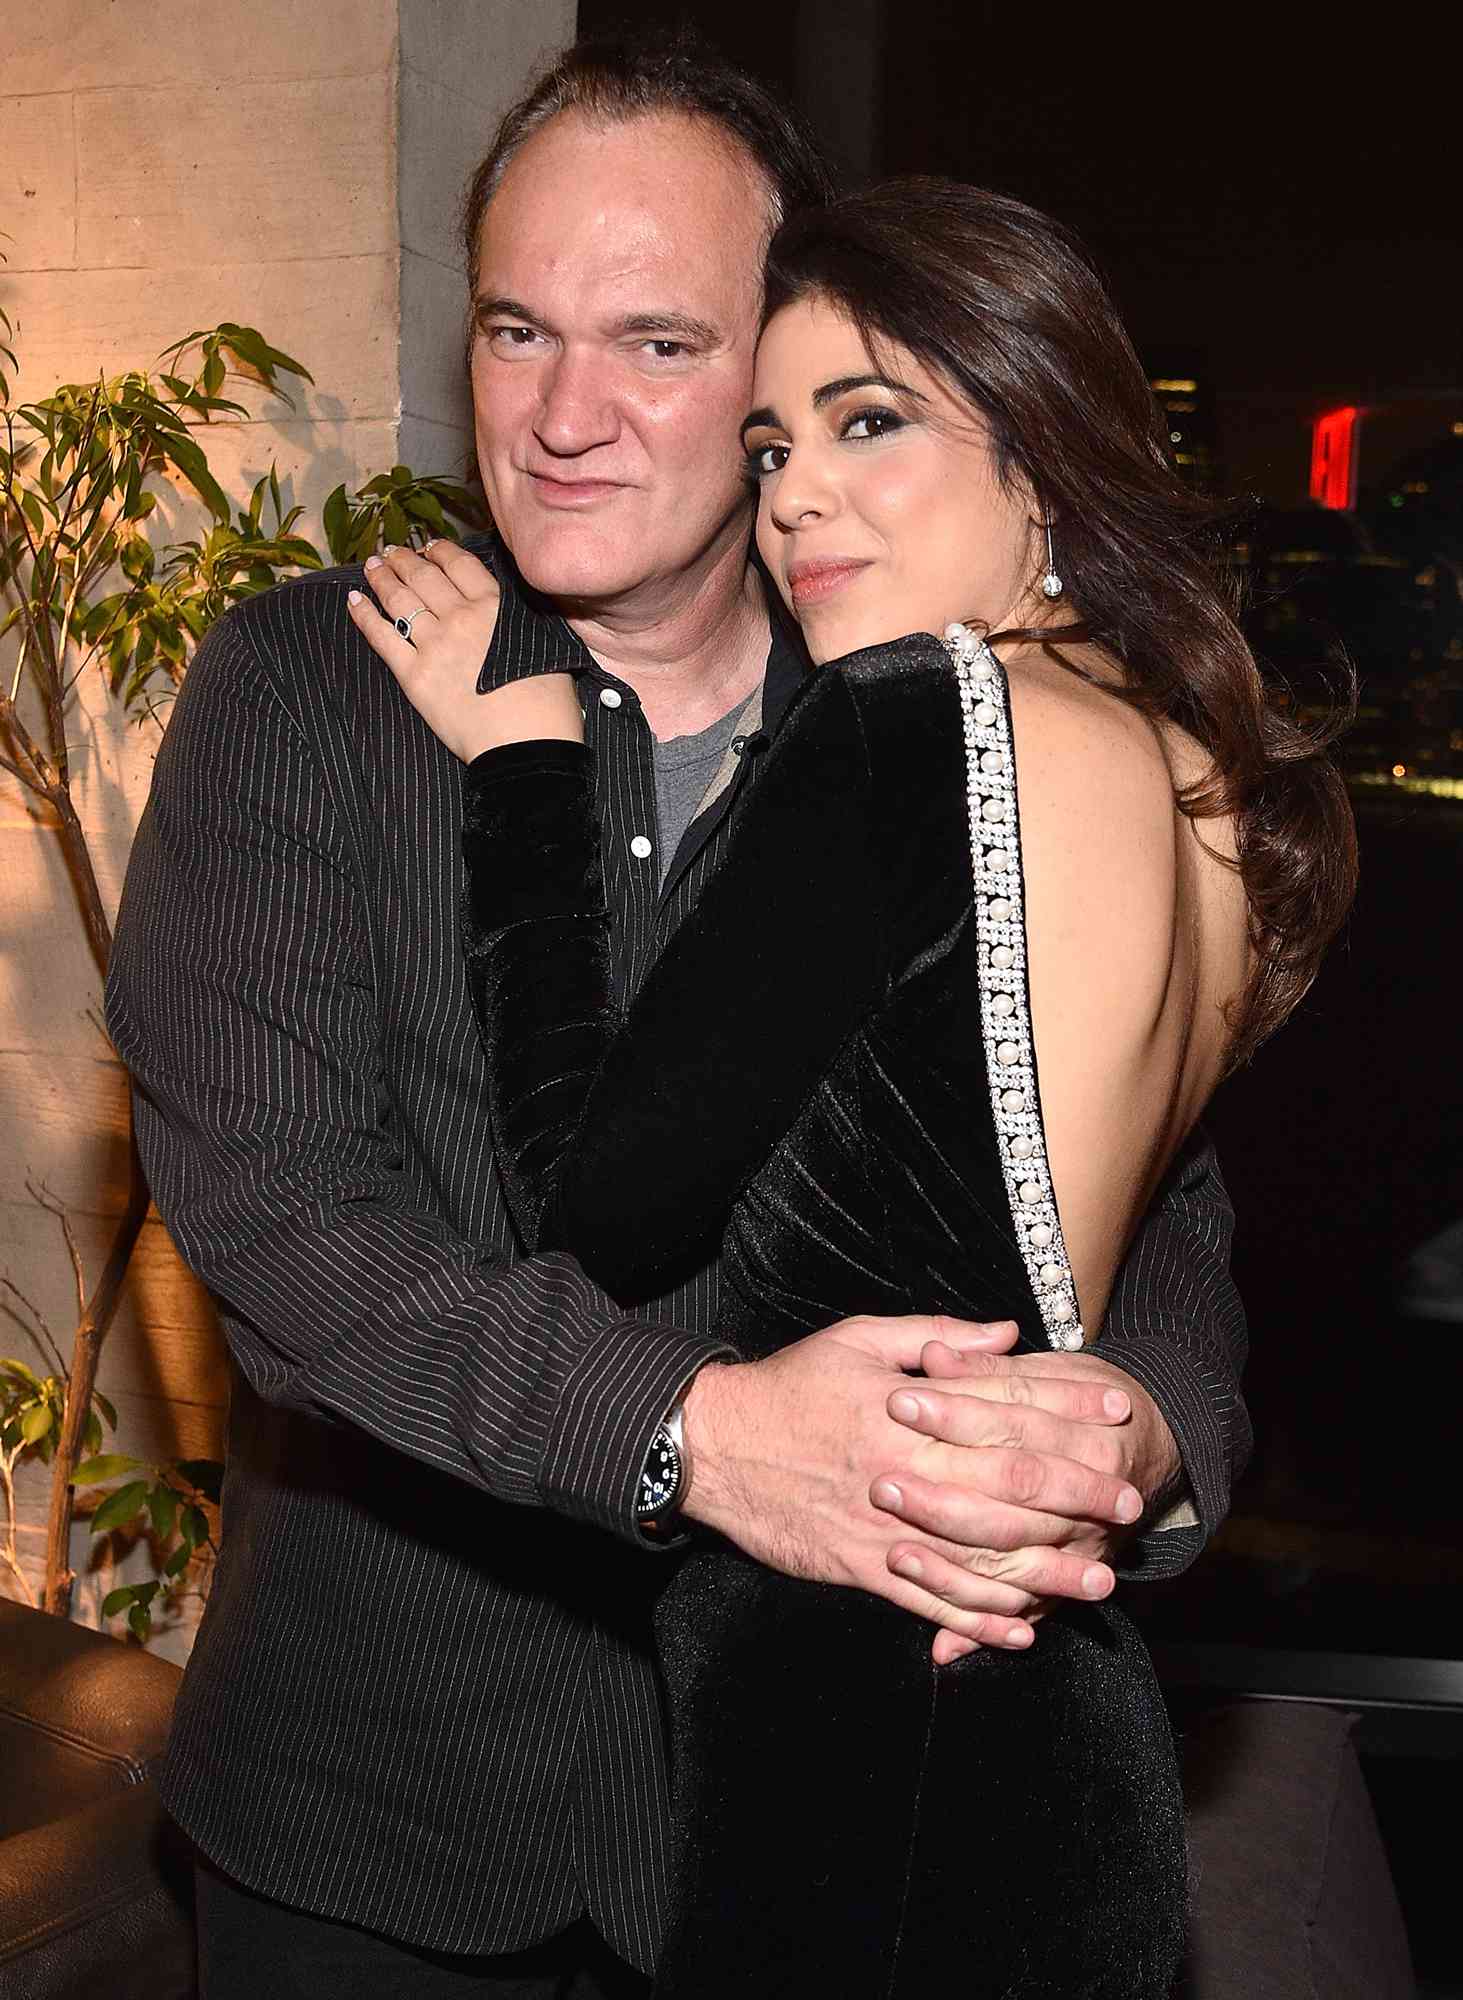 Quentin Tarantino and Daniella Pick attend 1 Hotel Brooklyn Bridge celebrates 25th Anniversary of "Reservoir Dogs" with private party for Harvey Weinstein and Quentin Tarantino at 1 Hotel on April 30, 2017 in Brooklyn, New York